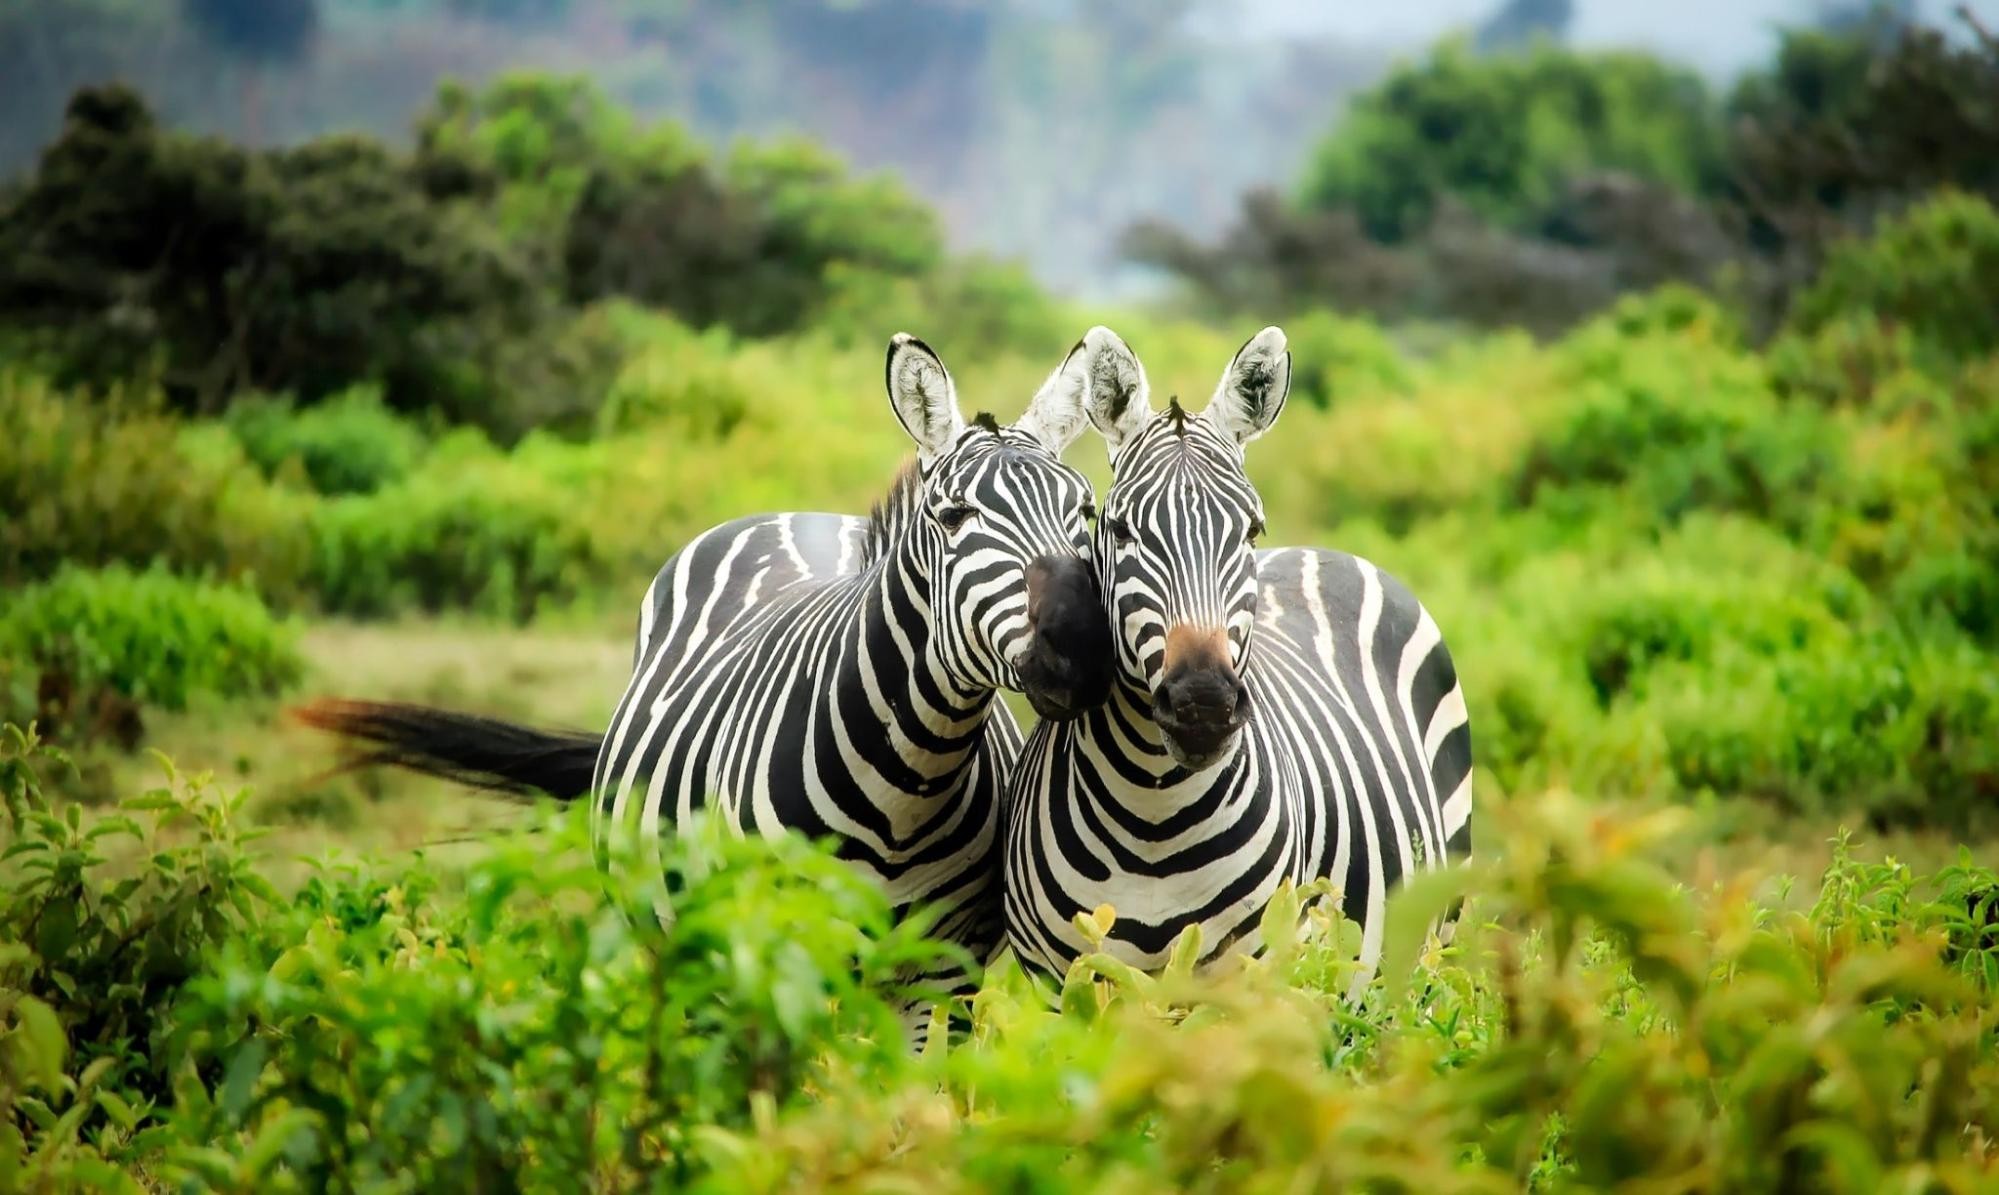 Two zebras in a zoo